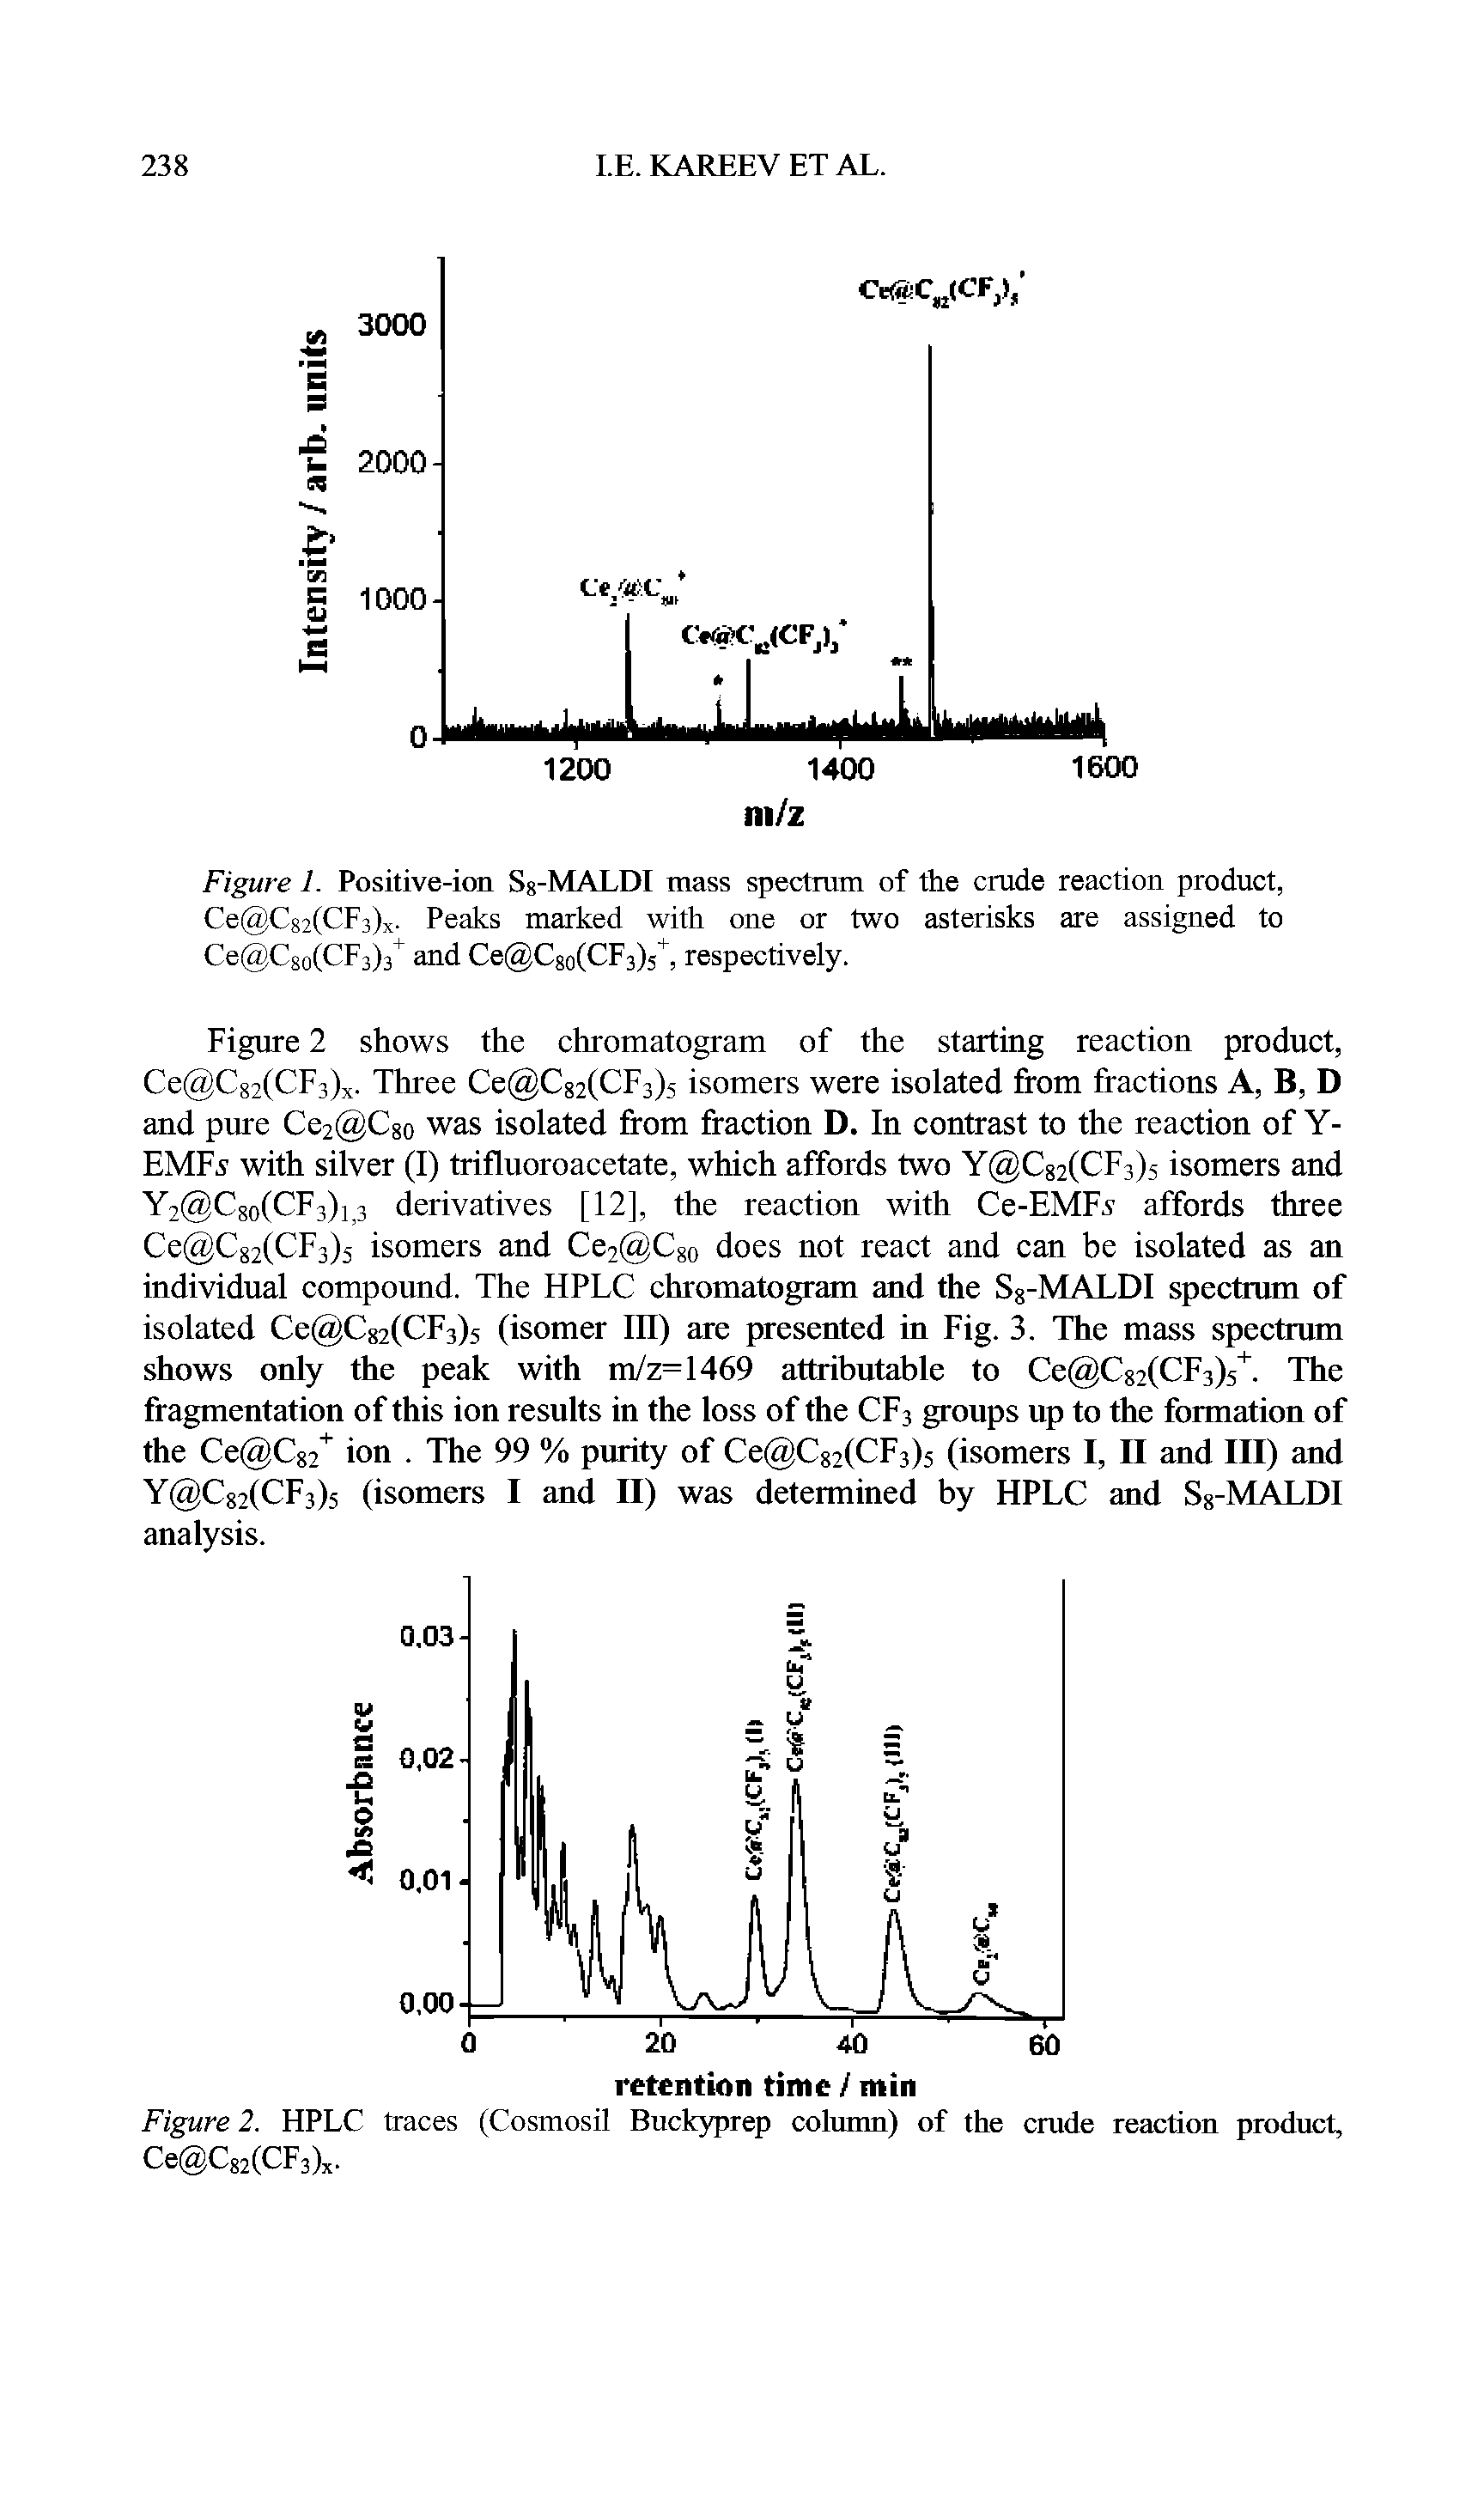 Figure 2 shows the chromatogram of the starting reaction product, Ce C82(CF3)x. Three Ce C82(CF3)5 isomers were isolated from fractions A, B, D and pure Ce2 Cgo was isolated from fraction D. In contrast to the reaction of Y-EMFs with silver (I) trifluoroacetate, which affords two Y C82(CF3)5 isomers and Y2 Cg0(CF3)13 derivatives [12], the reaction with Ce-EMFv affords three Ce Cg2(CF3)5 isomers and Ce2 Cg0 does not react and can be isolated as an individual compound. The F1PLC chromatogram and the Sg-MALDI spectrum of isolated Ce Cg2(CF3)5 (isomer III) are presented in Fig. 3. The mass spectrum shows only the peak with m/z=1469 attributable to Ce Cg2(CF3)5+. The fragmentation of this ion results in the loss of the CF3 groups up to the formation of the Ce C82+ ion. The 99 % purity of Ce C82(CF3)5 (isomers I, II and III) and Y Cg2(CF3)5 (isomers I and II) was determined by HPLC and Sg-MALDI analysis.